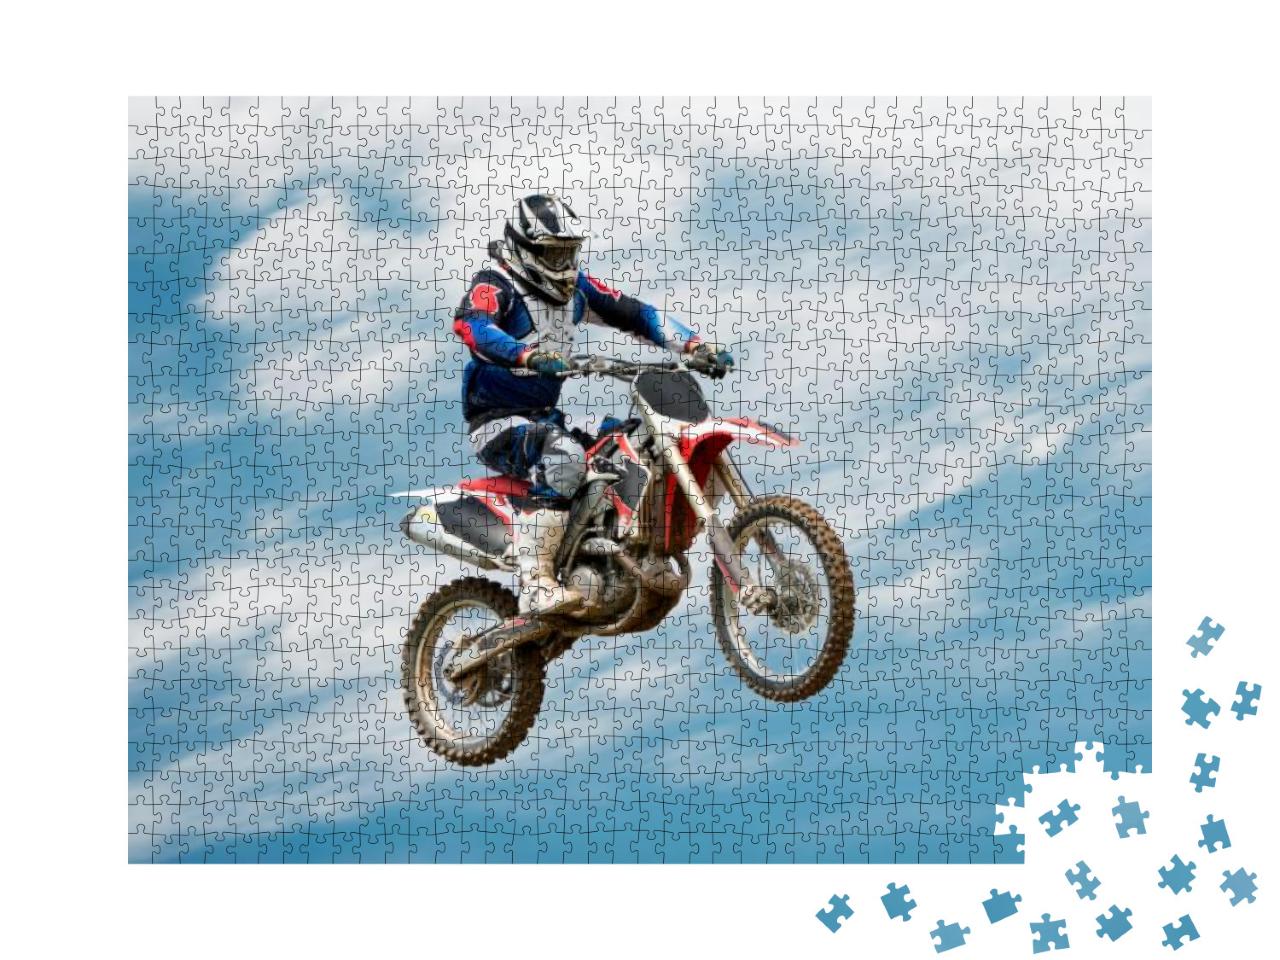 Biker Making Stunt & Jumps in the Air... Jigsaw Puzzle with 1000 pieces